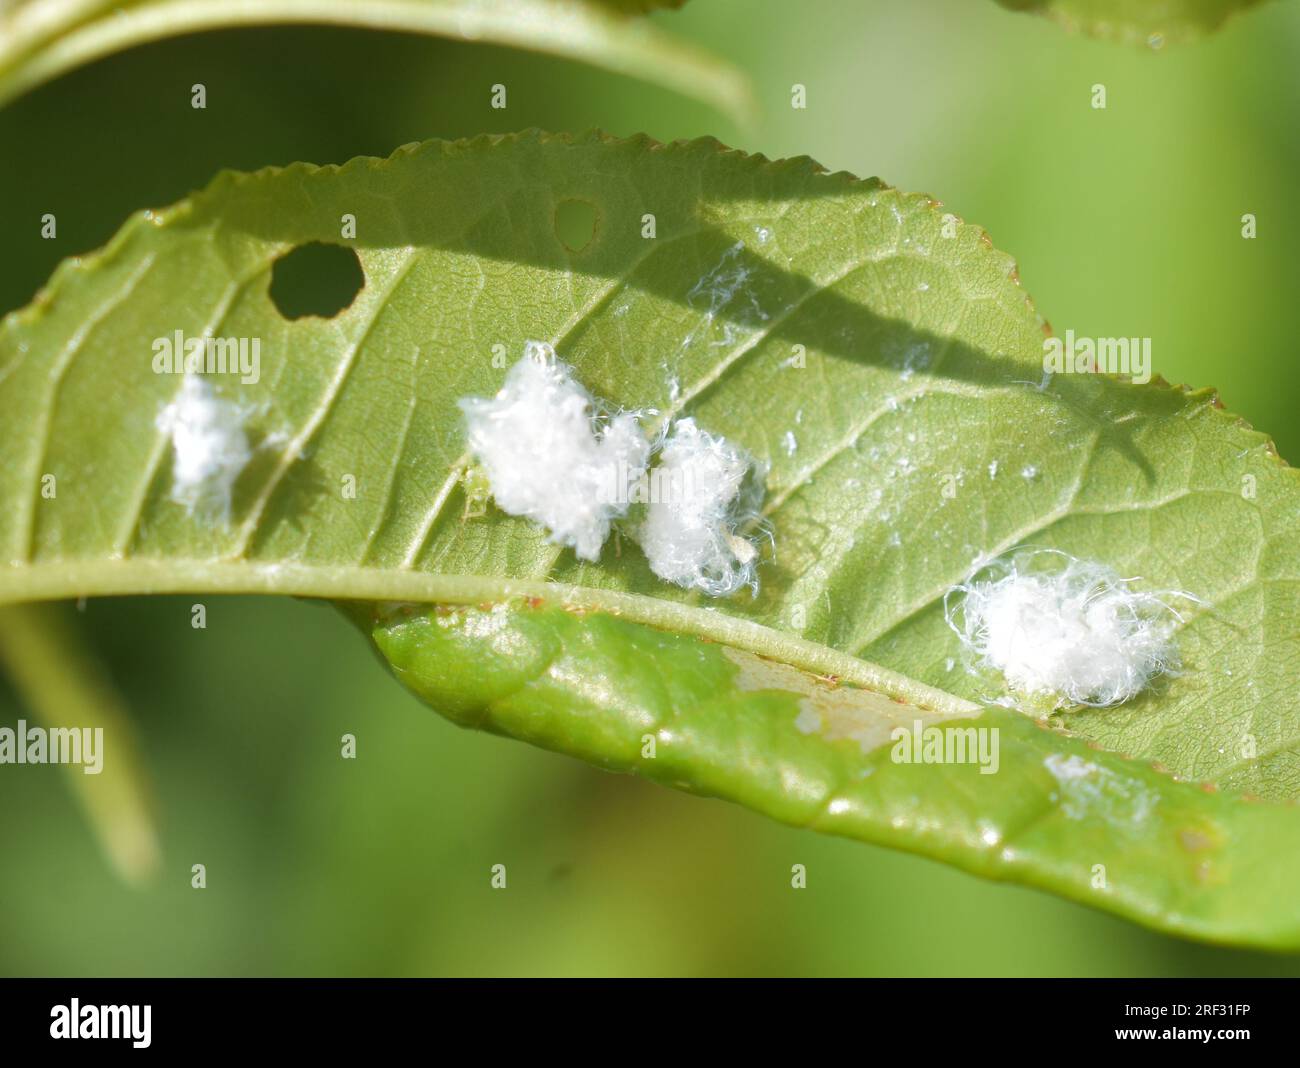 The white waxy psyllid nymph Psylla alni pest insect on leaf Stock Photo